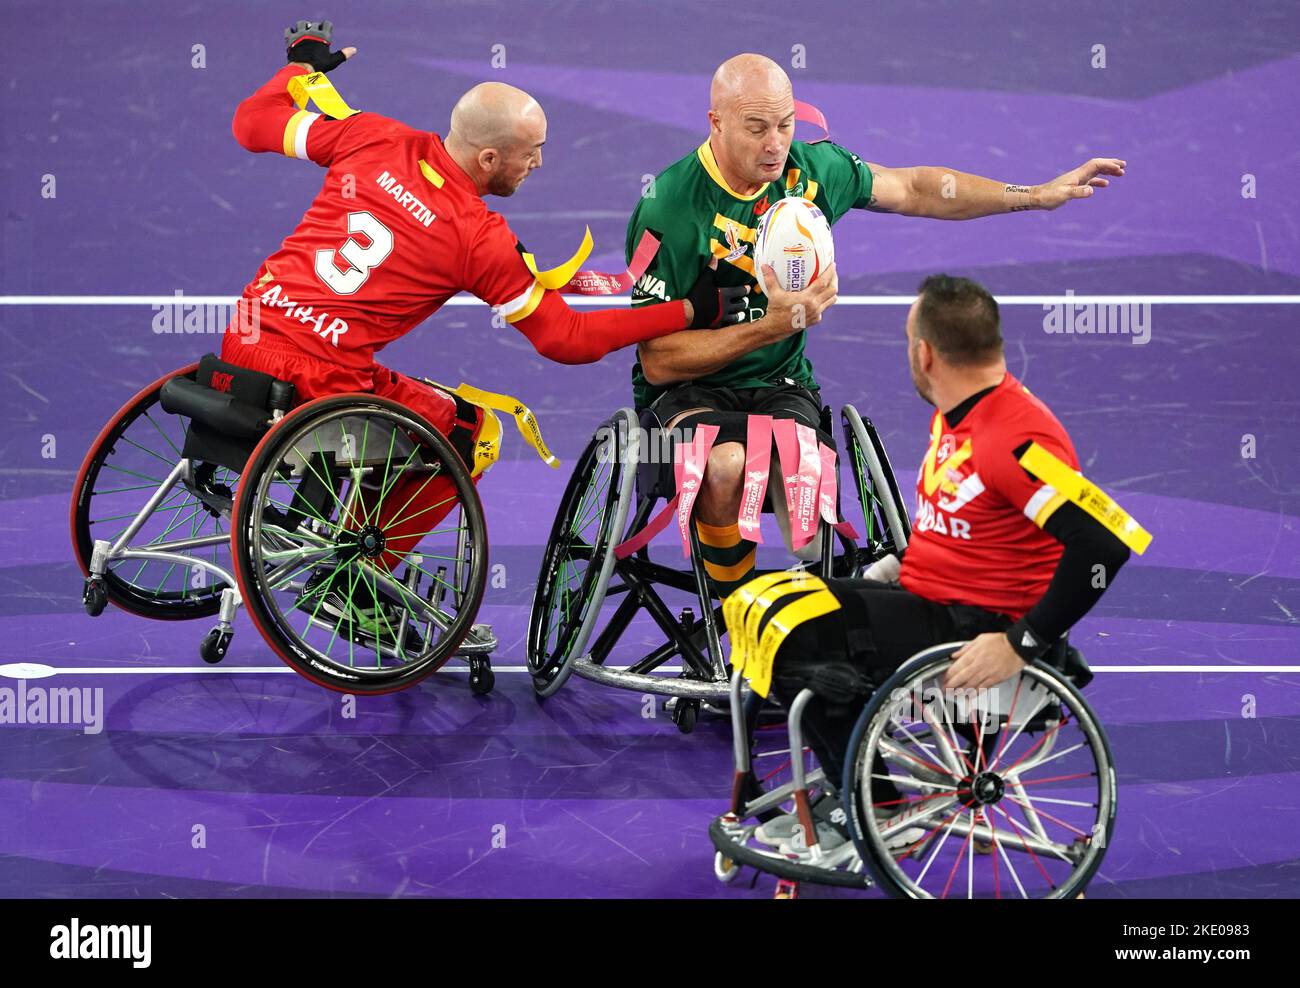 Australia's Peter Arbuckle is tackled by Spain's Yannick Martin during the Wheelchair Rugby League World Cup group A match at the Copper Box Arena, London. Picture date: Wednesday November 9, 2022. Stock Photo